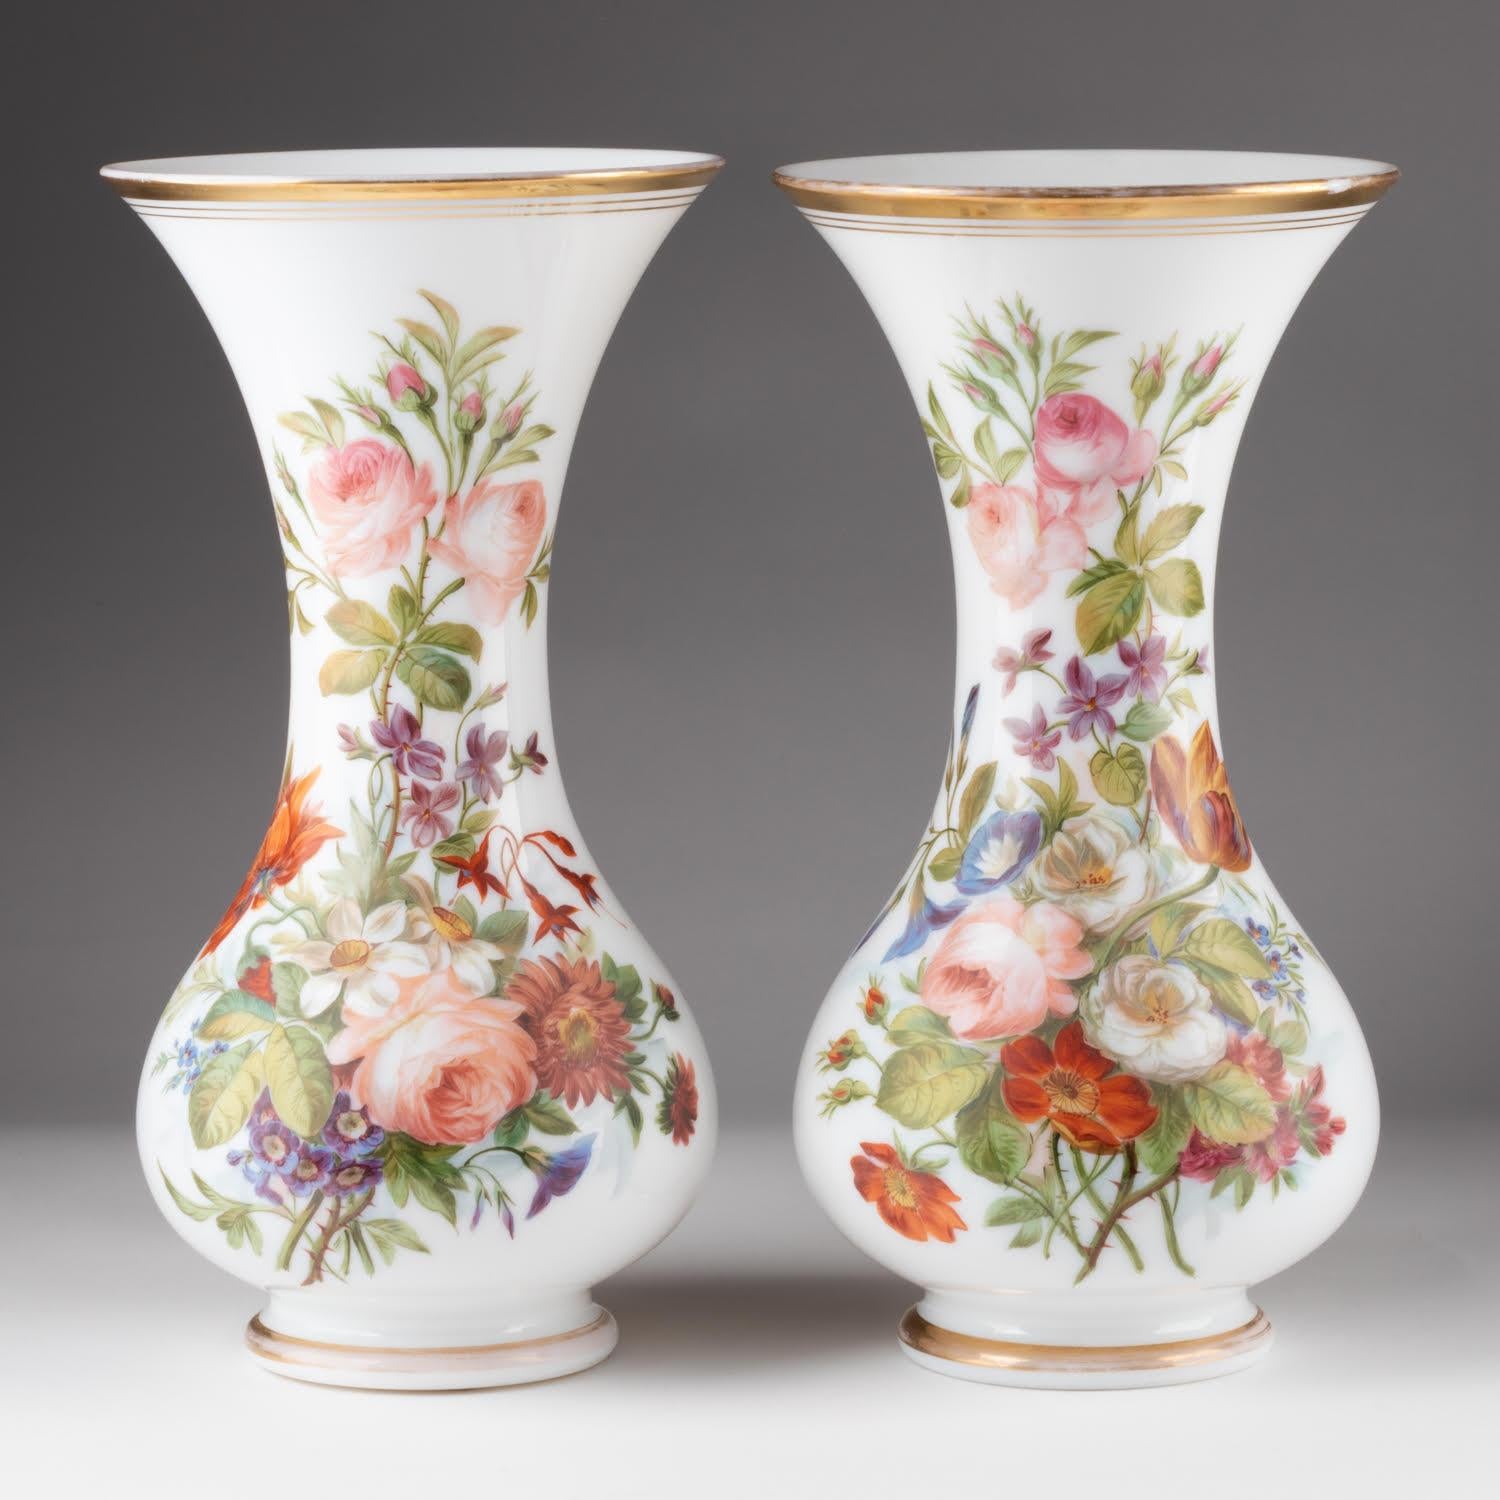 Pair of Opaline Vases Painted with Floral Motifs, 19th Century.

A pair of 19th century opaline vases, Napoleon III period, with a pretty painting of bouquets of coloured flowers, enhanced with gold.   
Photos:(c)inu.studio_art 
H: 34cm , d: 18cm